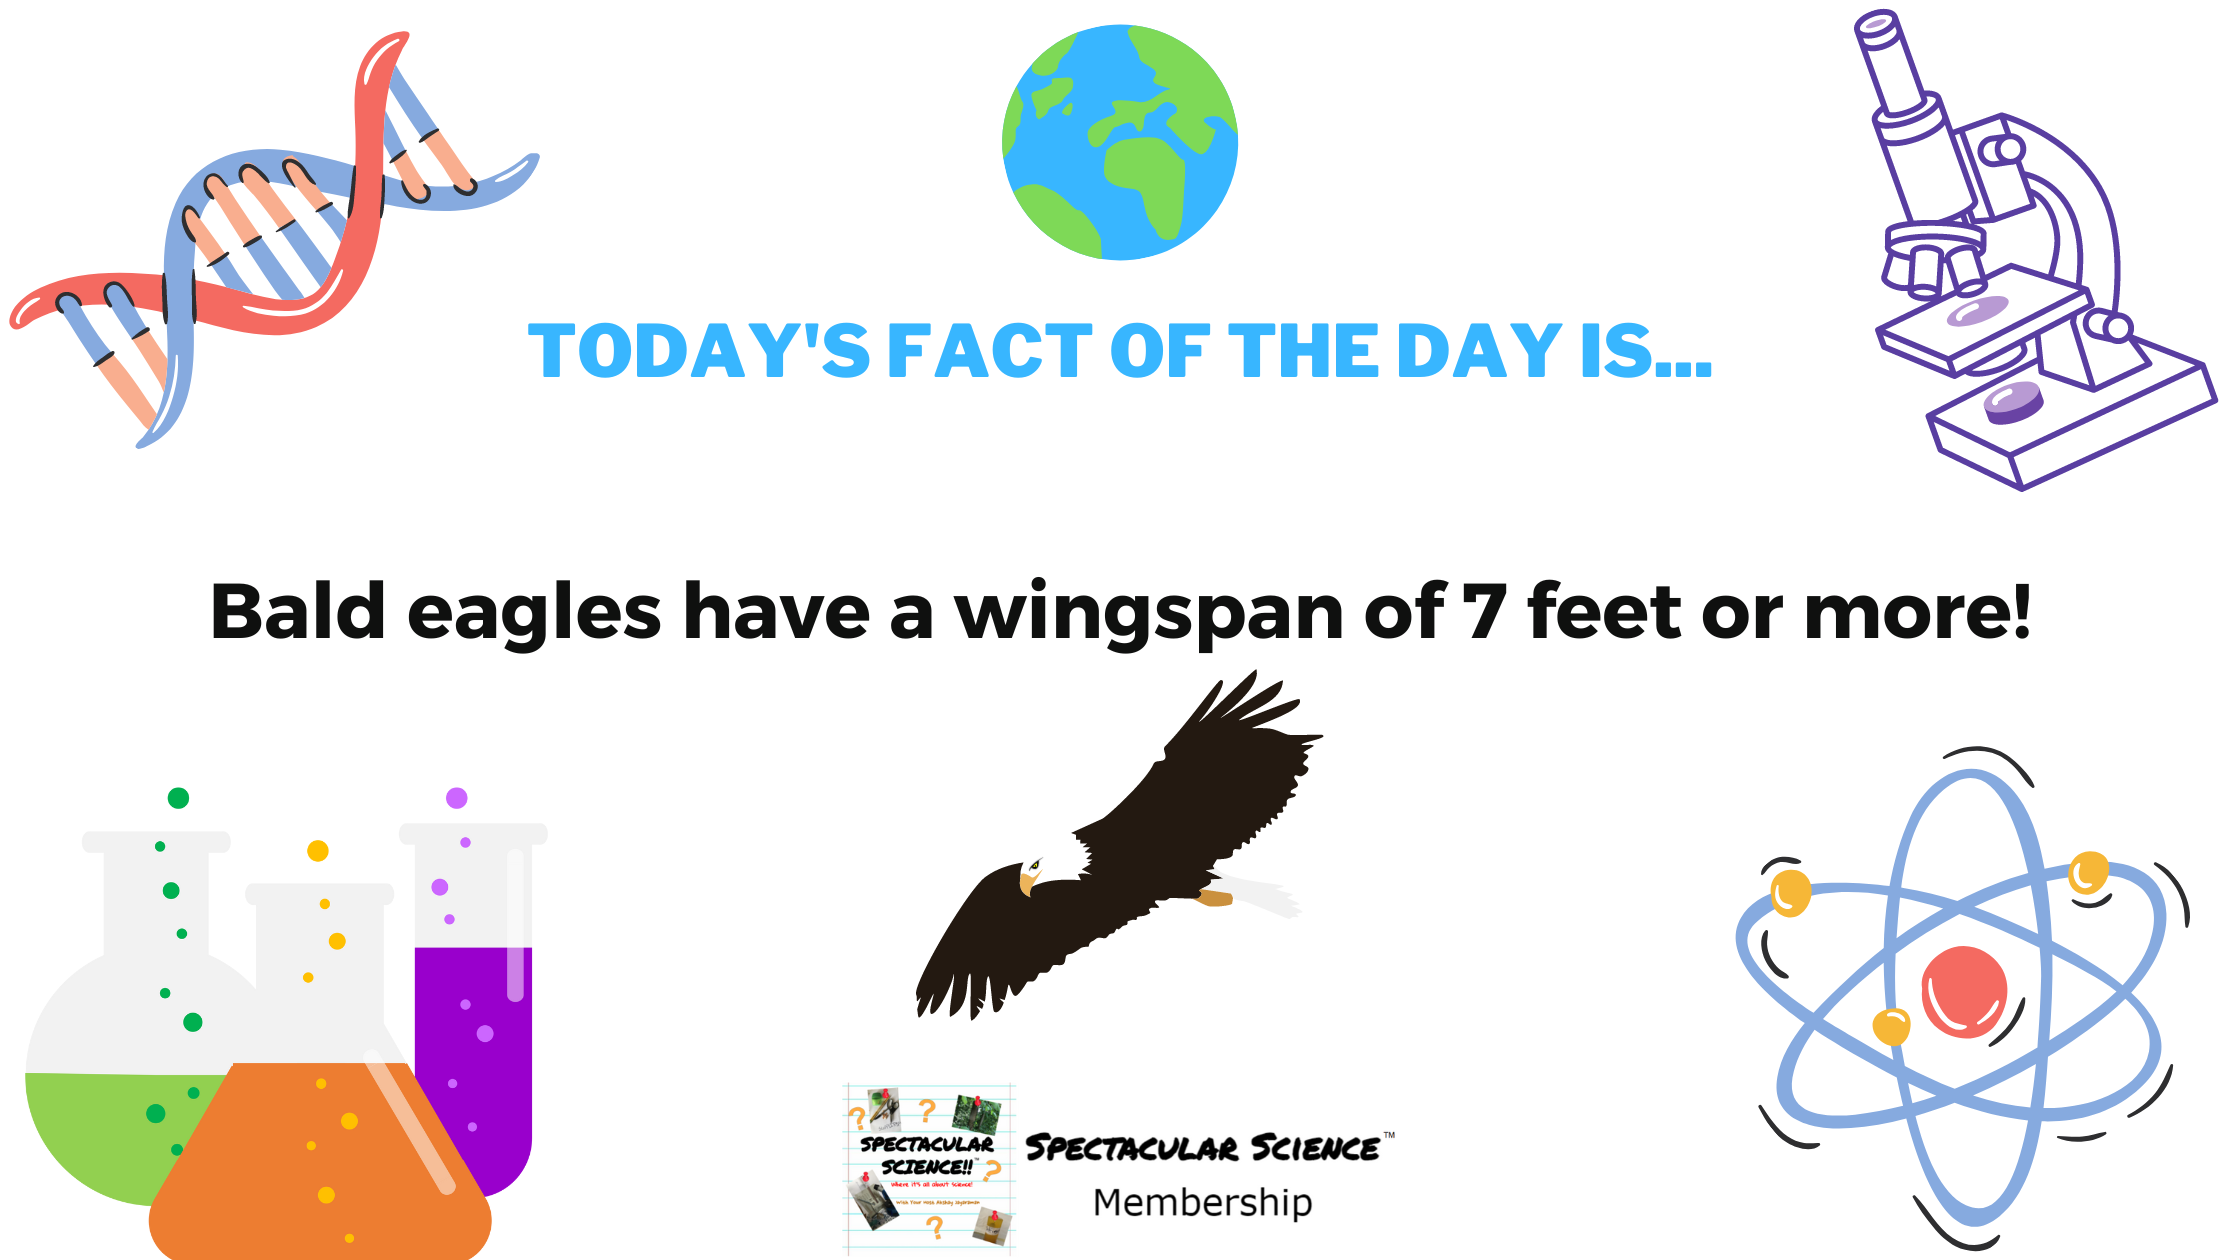 Fact of the Day Image August 1st